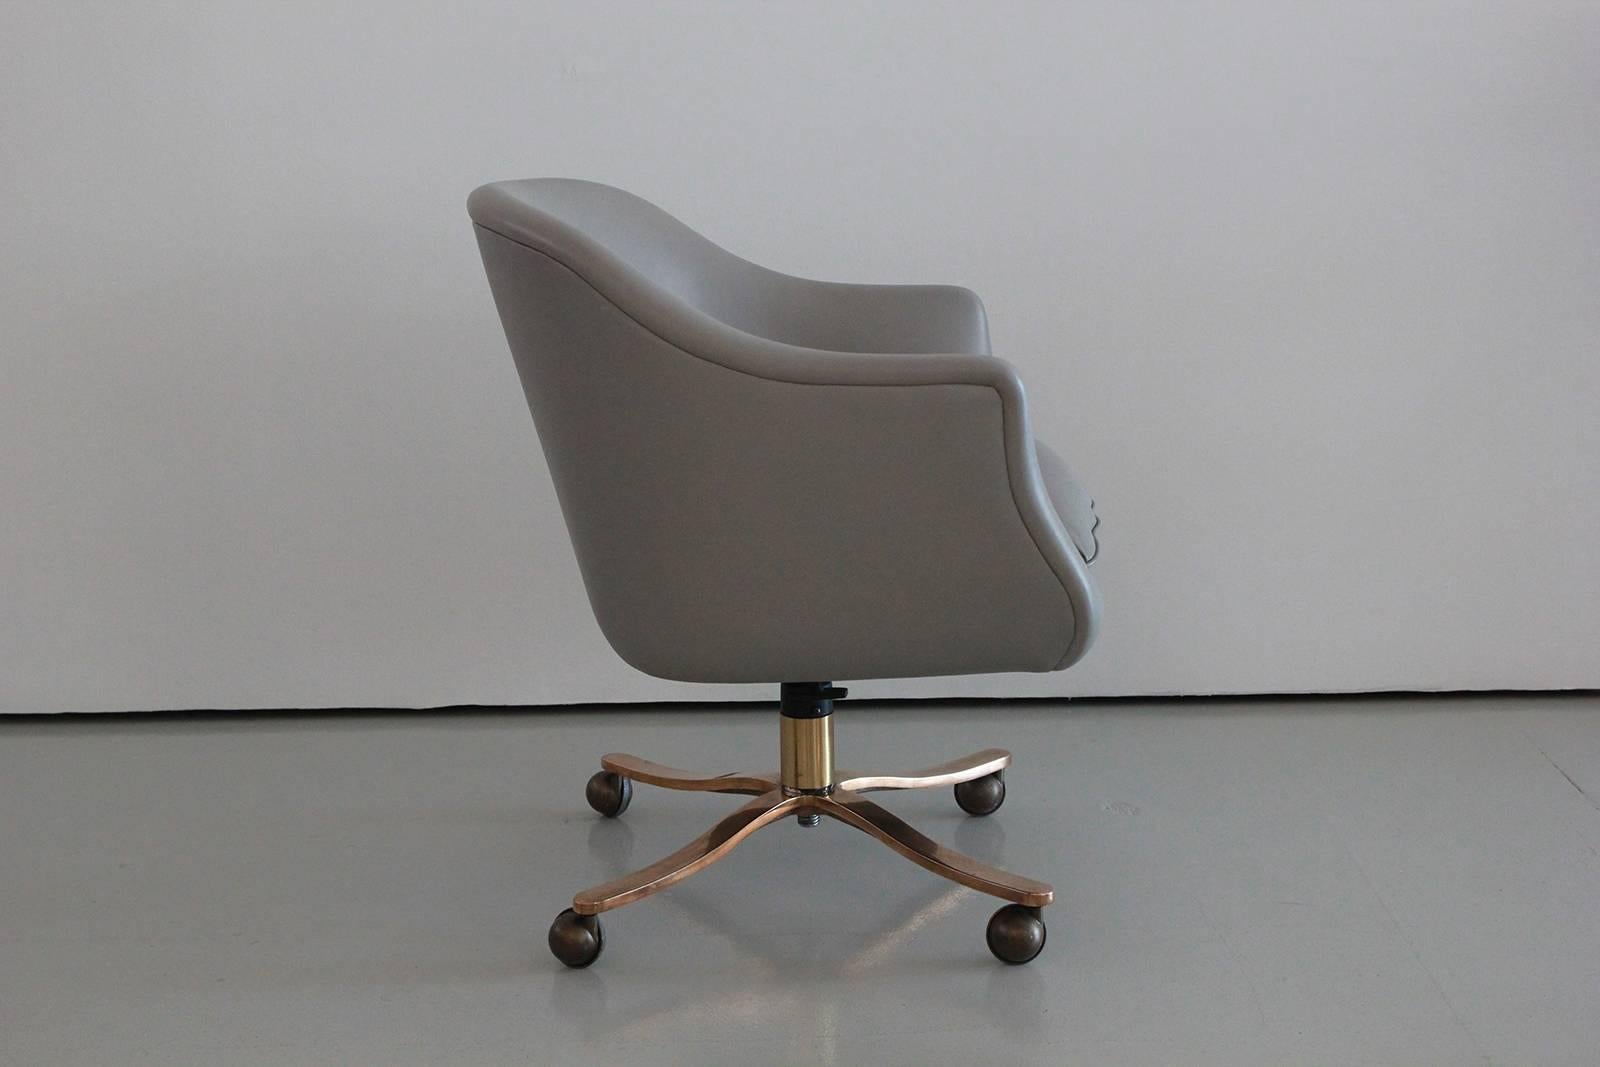 Grey leather desk chair by Ward Bennet for Zographos modern. Bronze swivel barrel conference room chair. Original leather.
Multiple available. Priced individually.